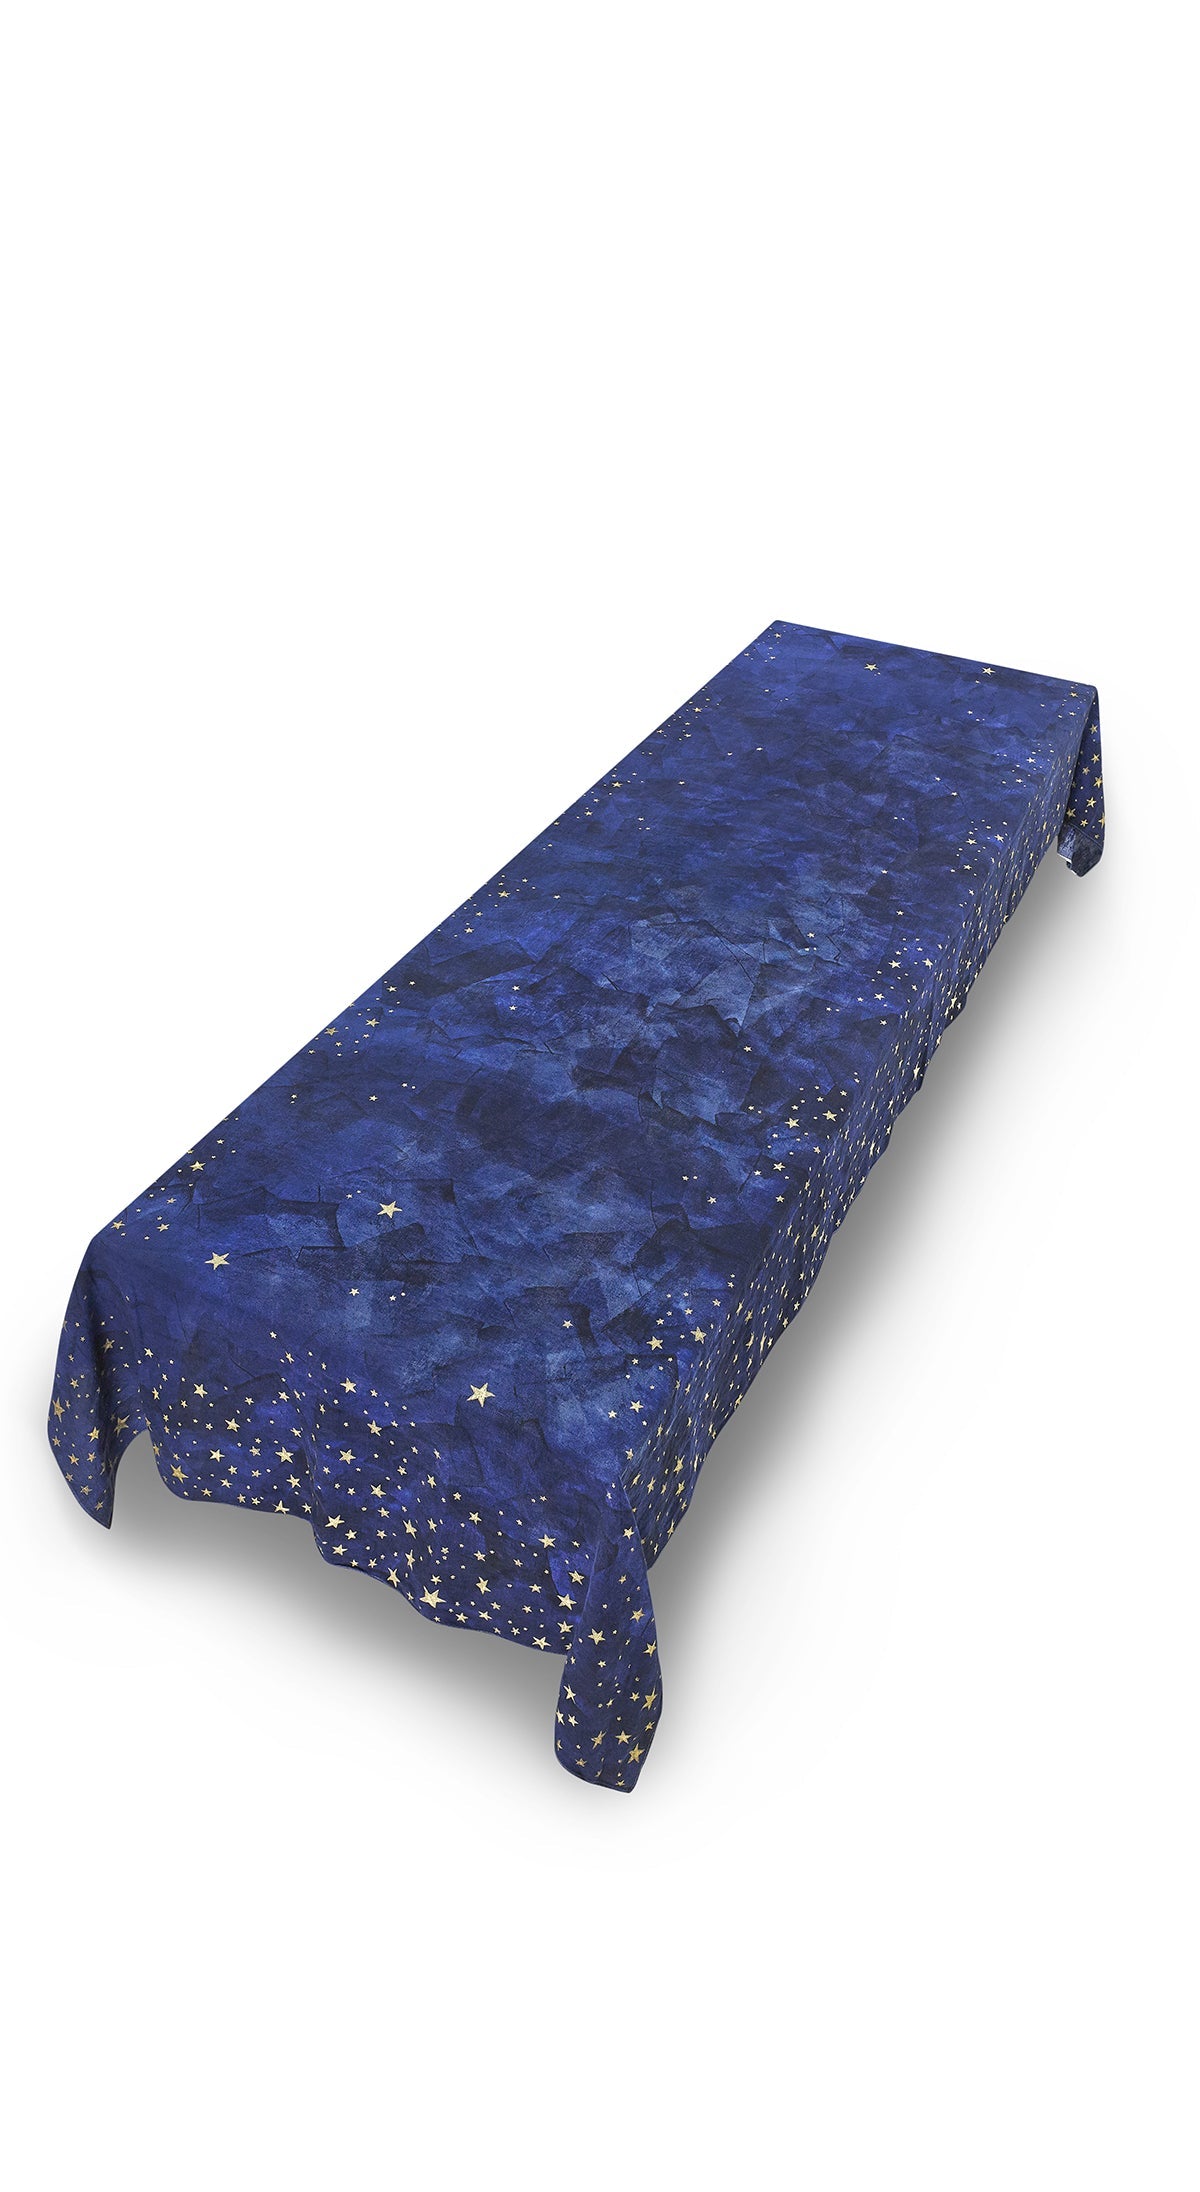 Falling Stars Linen Tablecloth in Ink Blue with Gold Stars